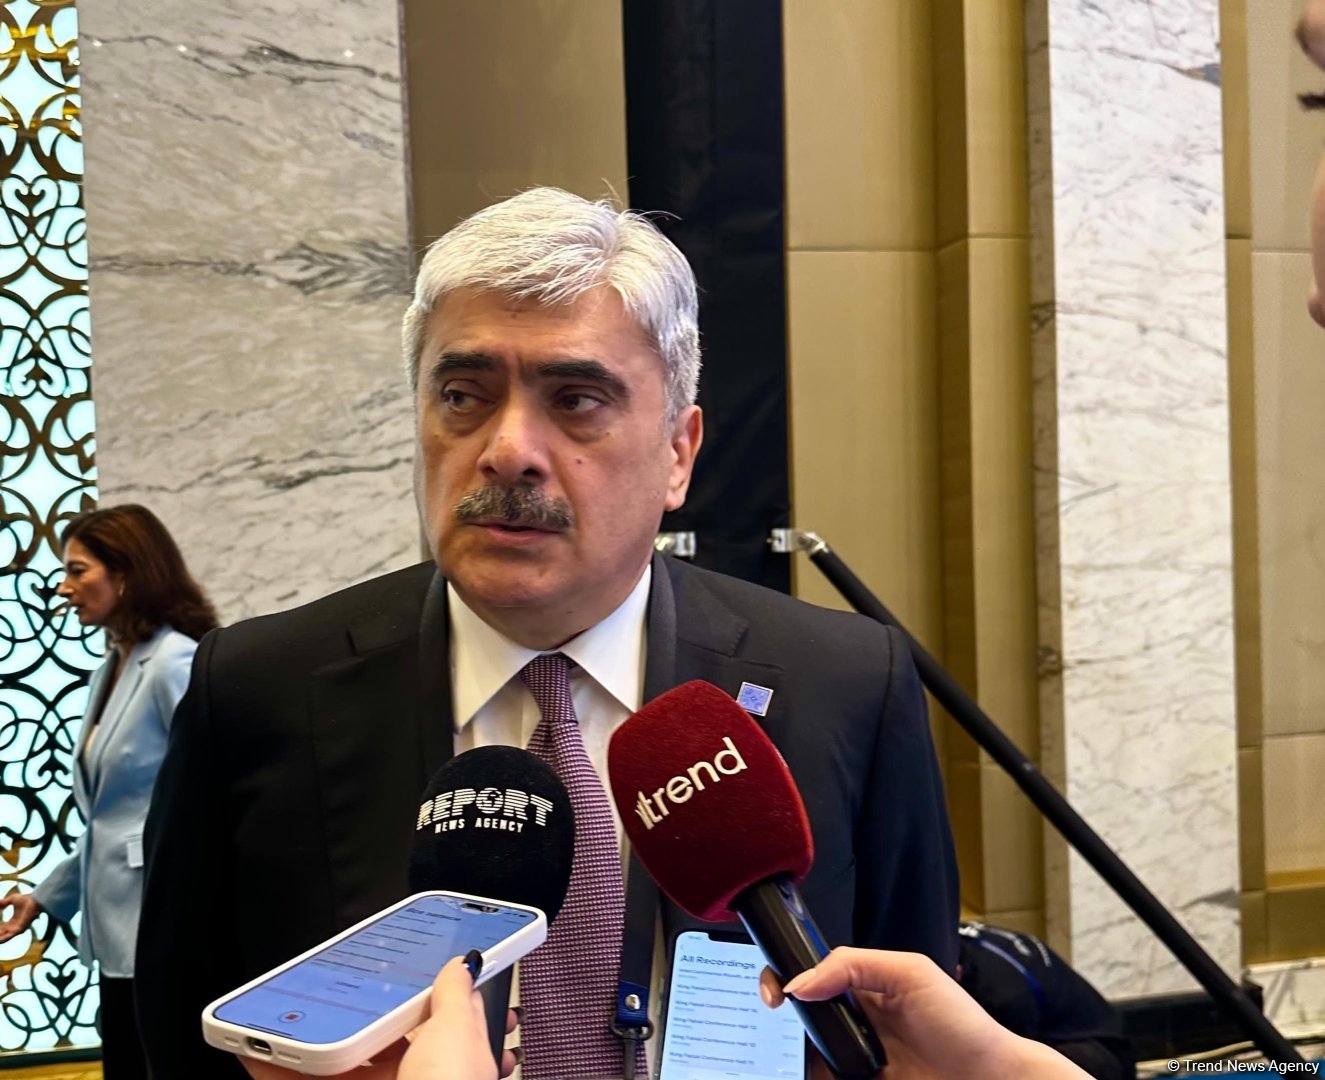 International financial entities favored in funding Middle Corridor dev't. - Azerbaijani minister